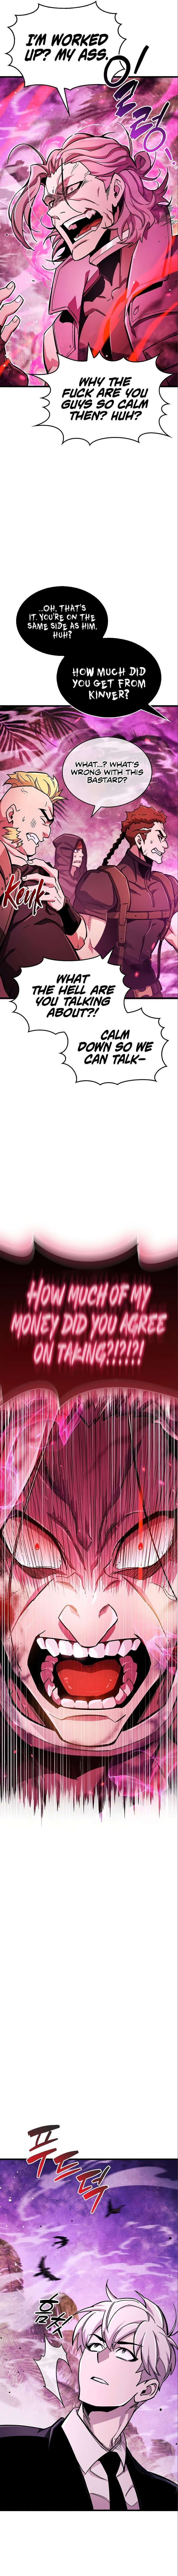 The Player Hides His Past Chapter 22 page 16